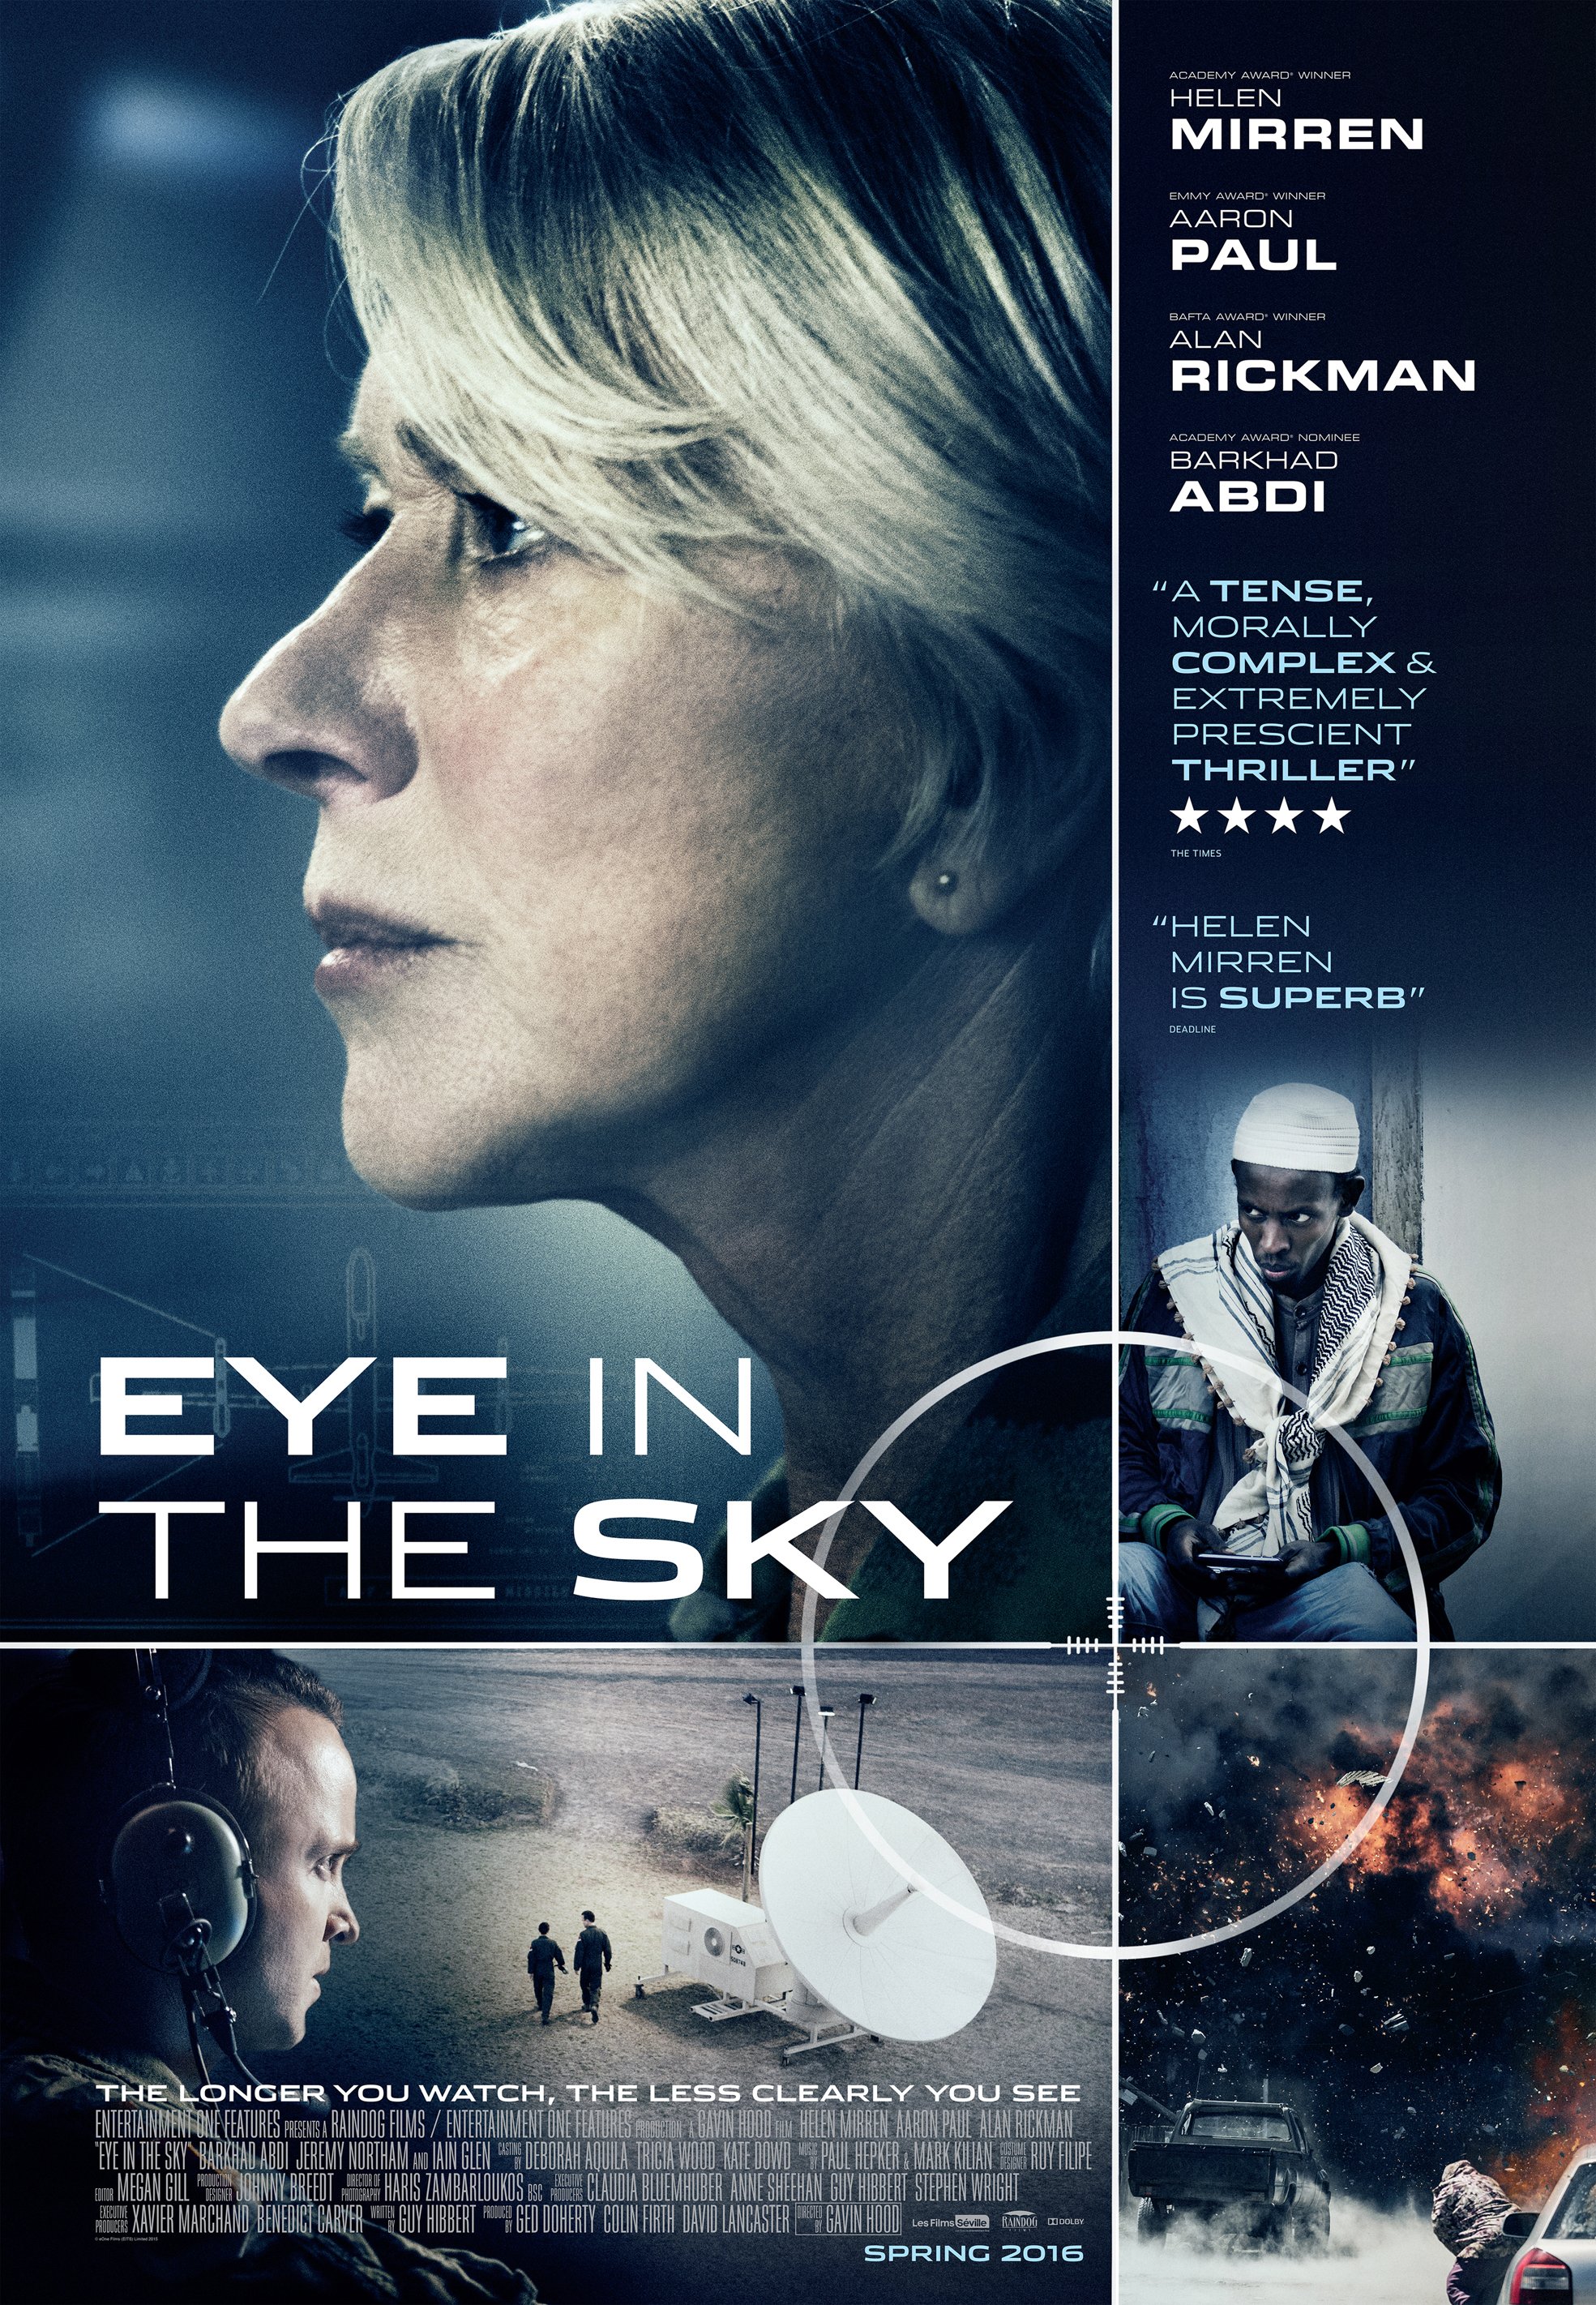 Poster of the movie Eye in the Sky